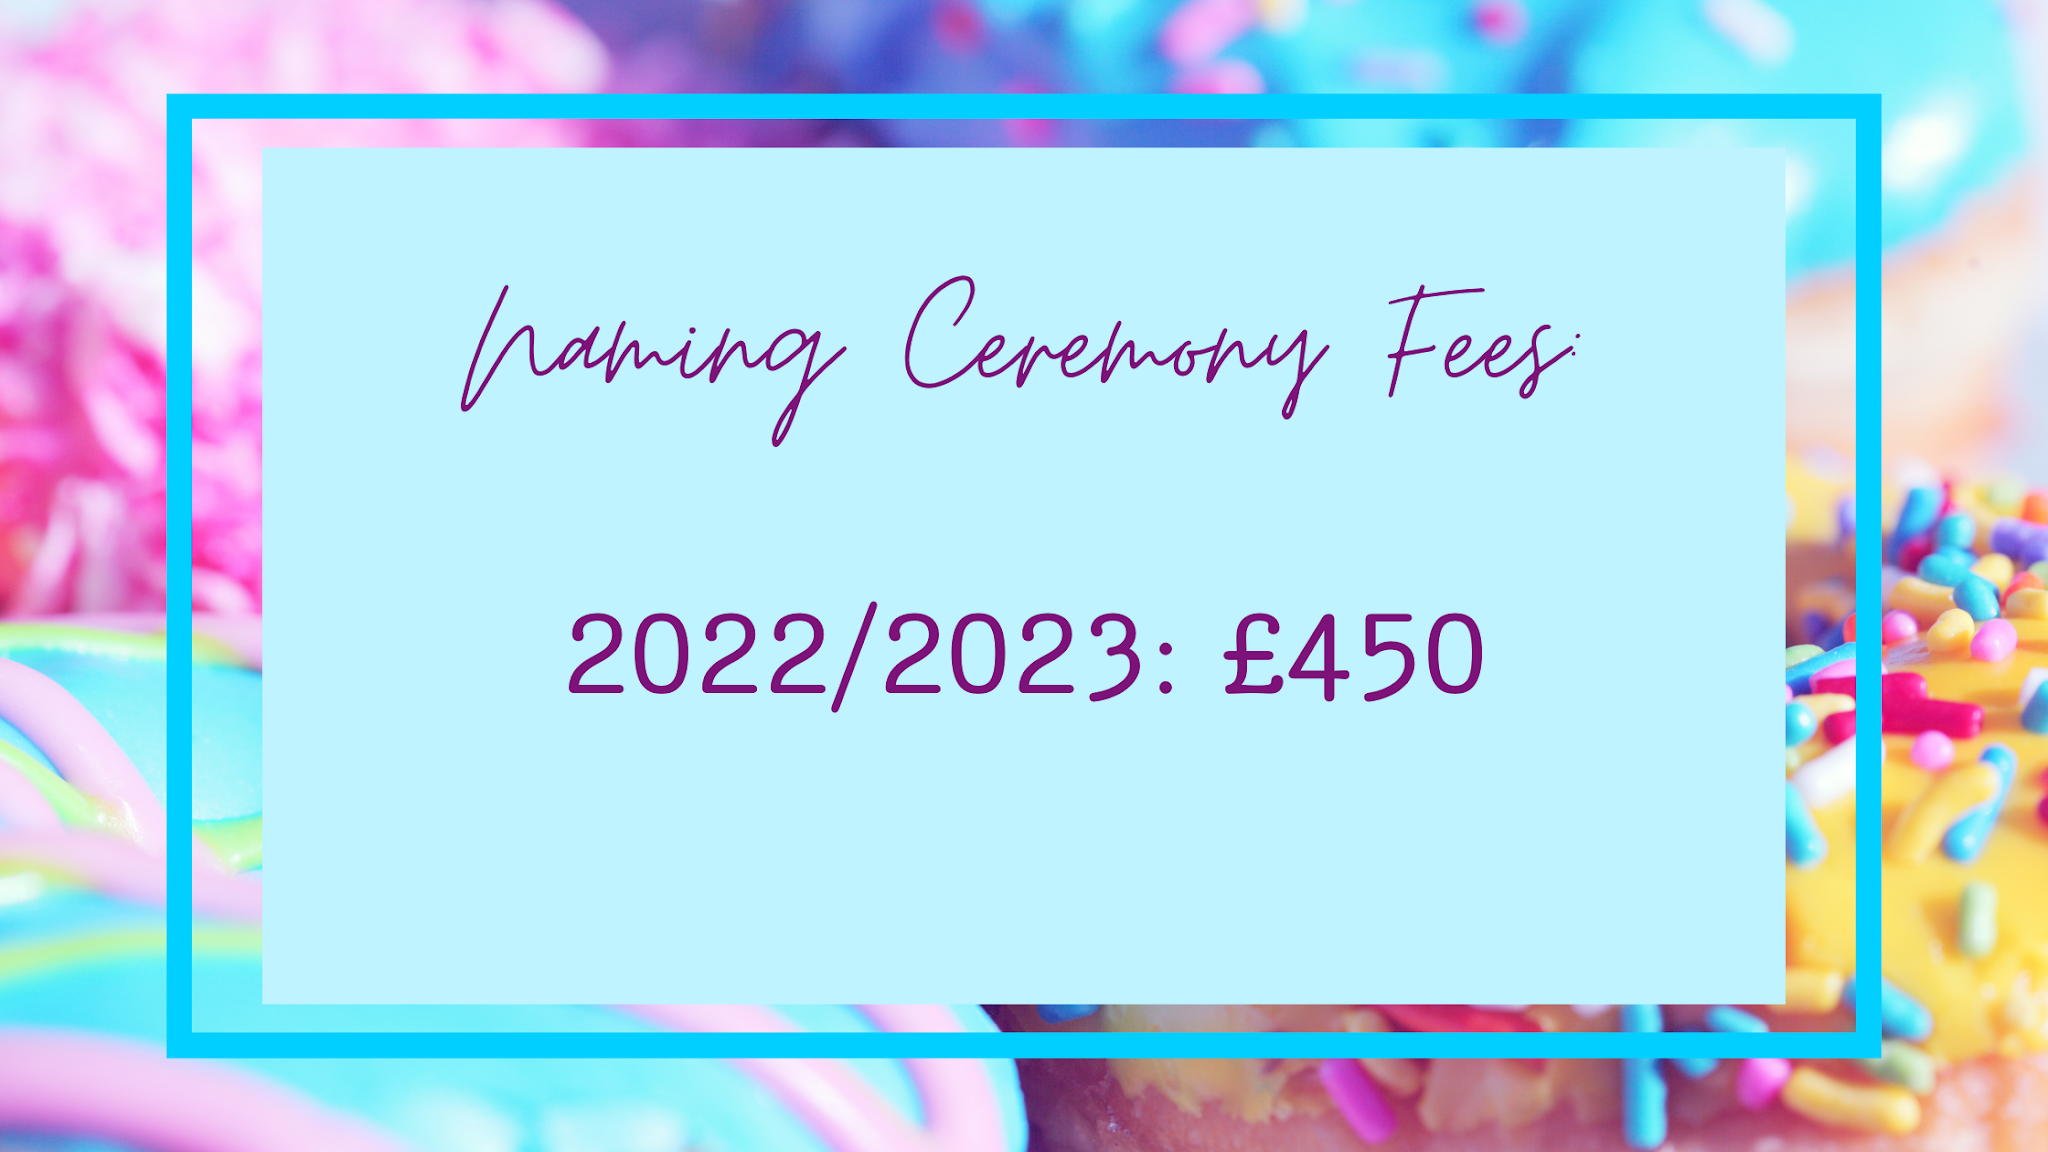 Naming Ceremony Fees: 2022/2023: £450